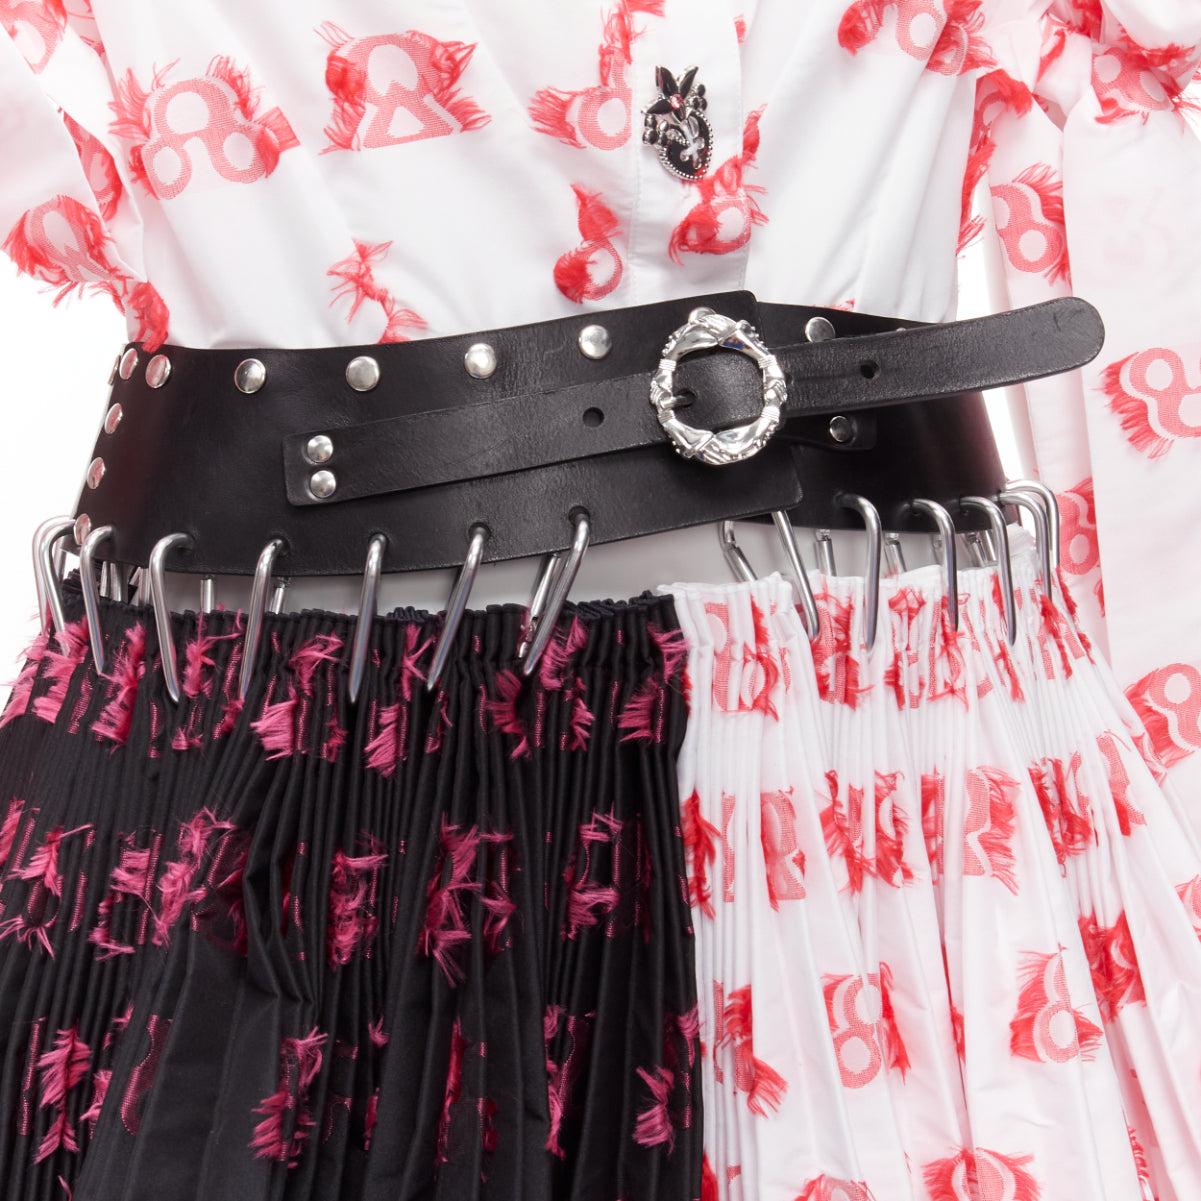 CHOPOVA LOWENA 2023 Apex white red carabiner black leather punk stud puff mini dress XS
Reference: AAWC/A00516
Brand: Chopova Lowena
Model: Apex Carabiner
Collection: 2022
Material: Polyester
Color: White, Red
Pattern: Abstract
Closure: Belt
Extra